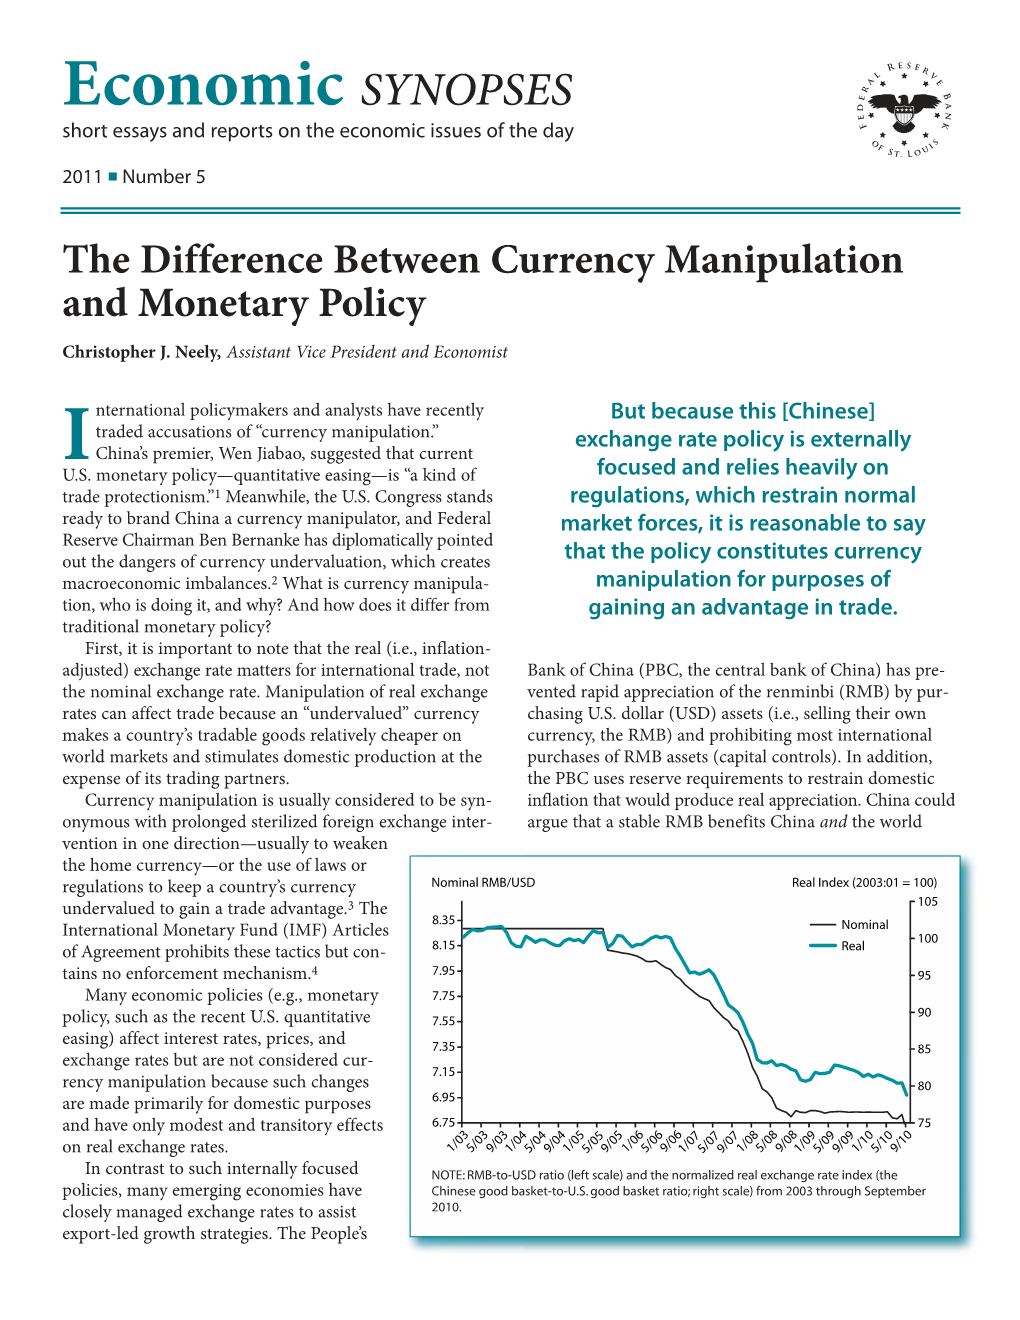 The Difference Between Currency Manipulation and Monetary Policy